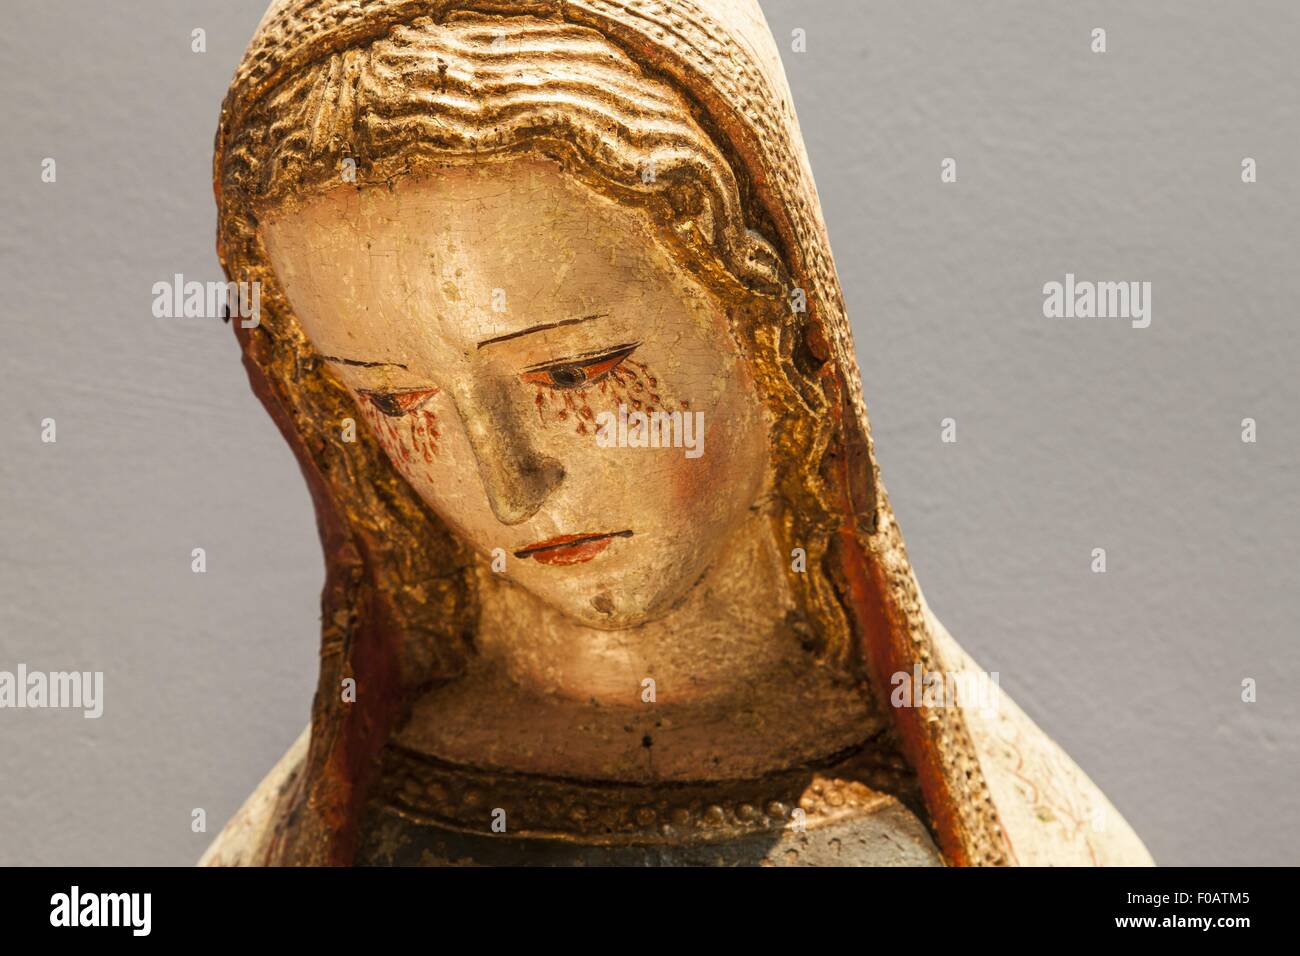 Close-up of St Mary, Augustiner museum, Freiburg, Germany Stock Photo